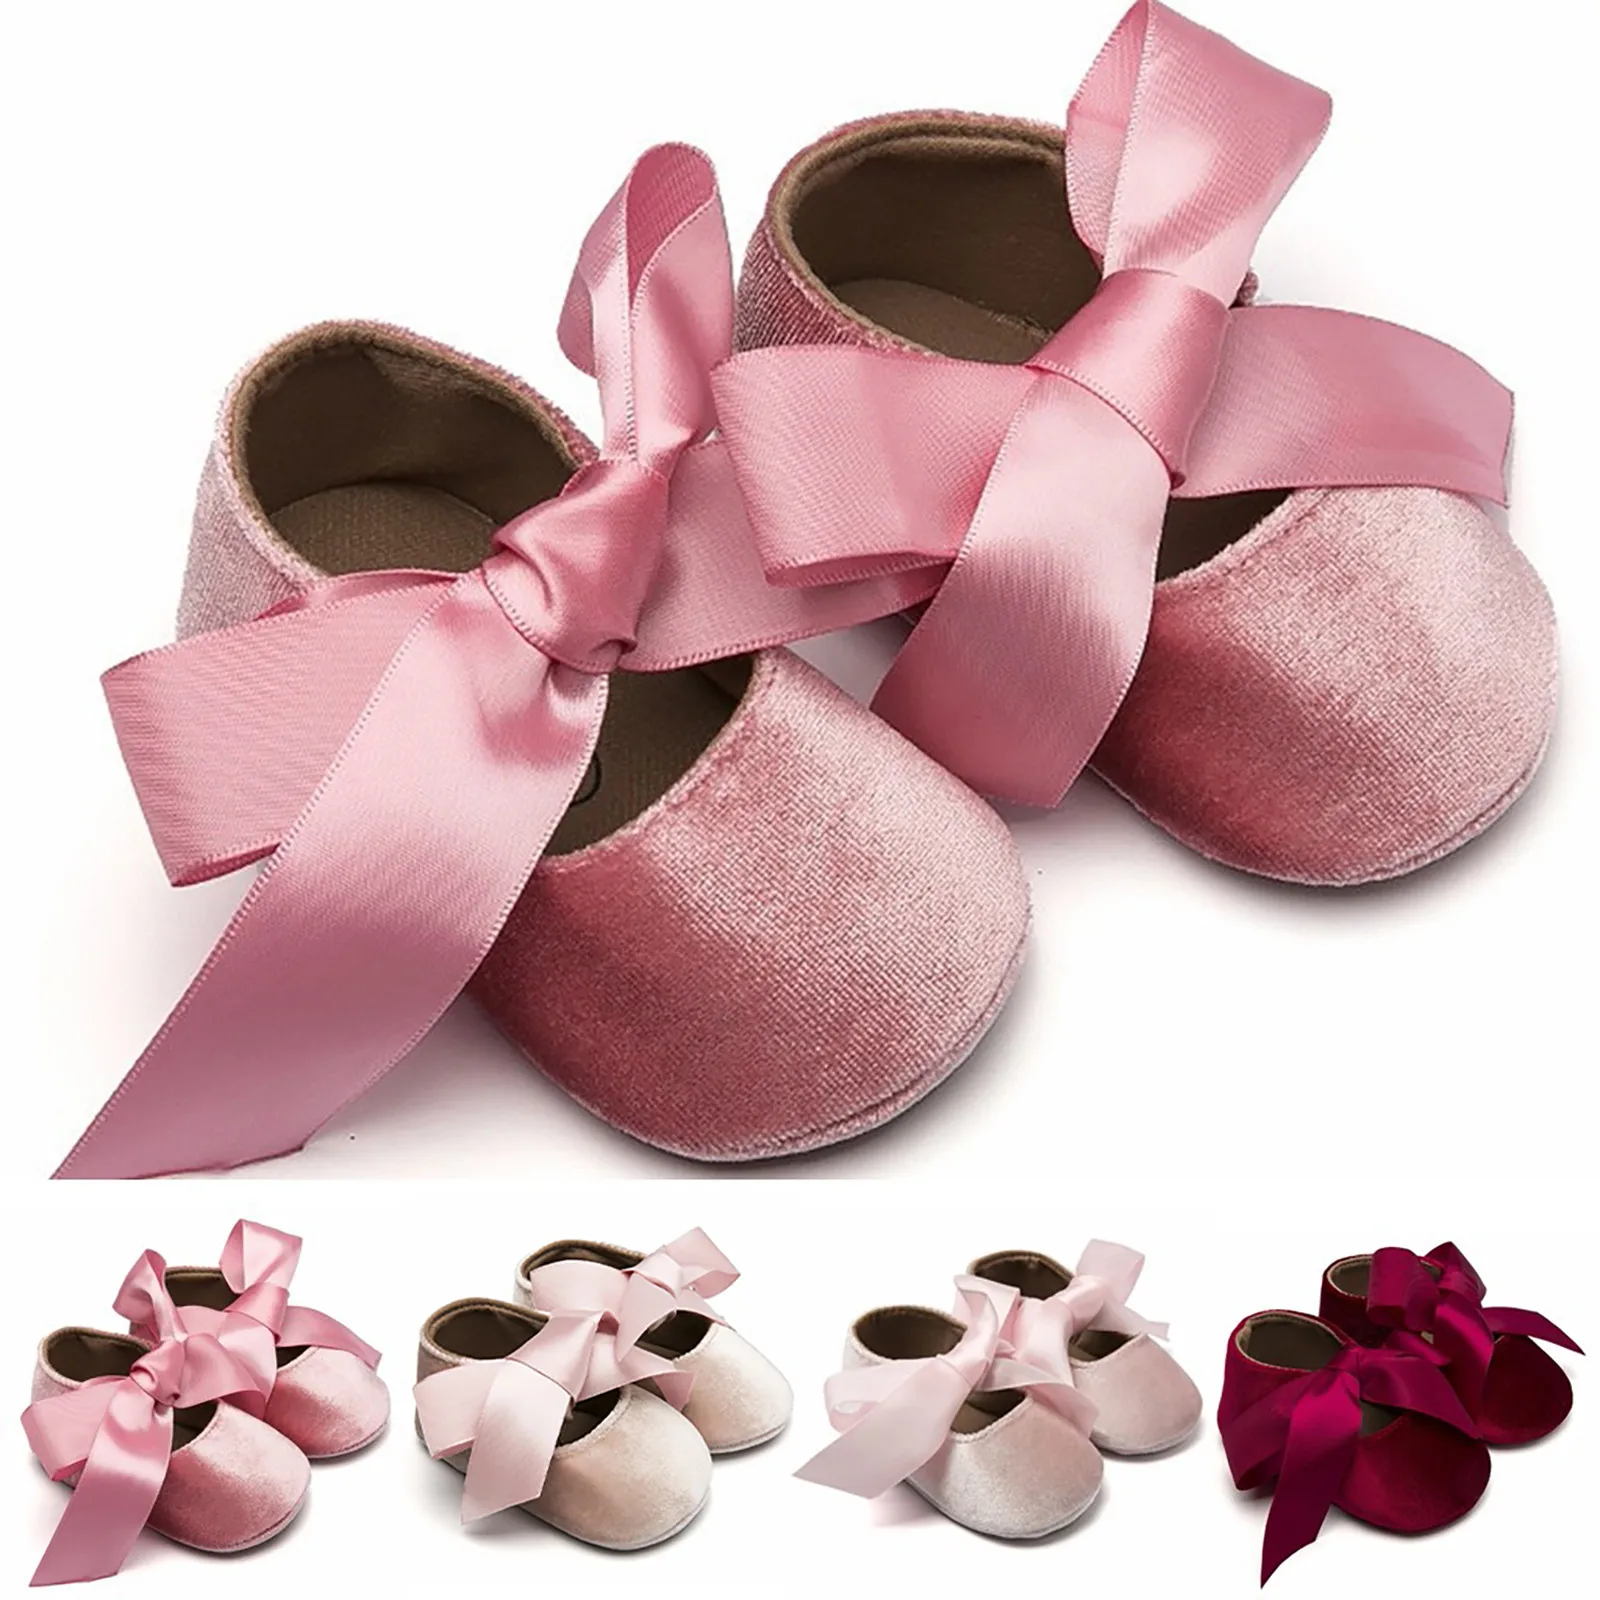 

Sweety Baby Girl Cute Shoes Bow Lace Up PU Leather Princess Baby Shoes First Walkers Newborn Moccasins Toddler Shoes Baby Girls